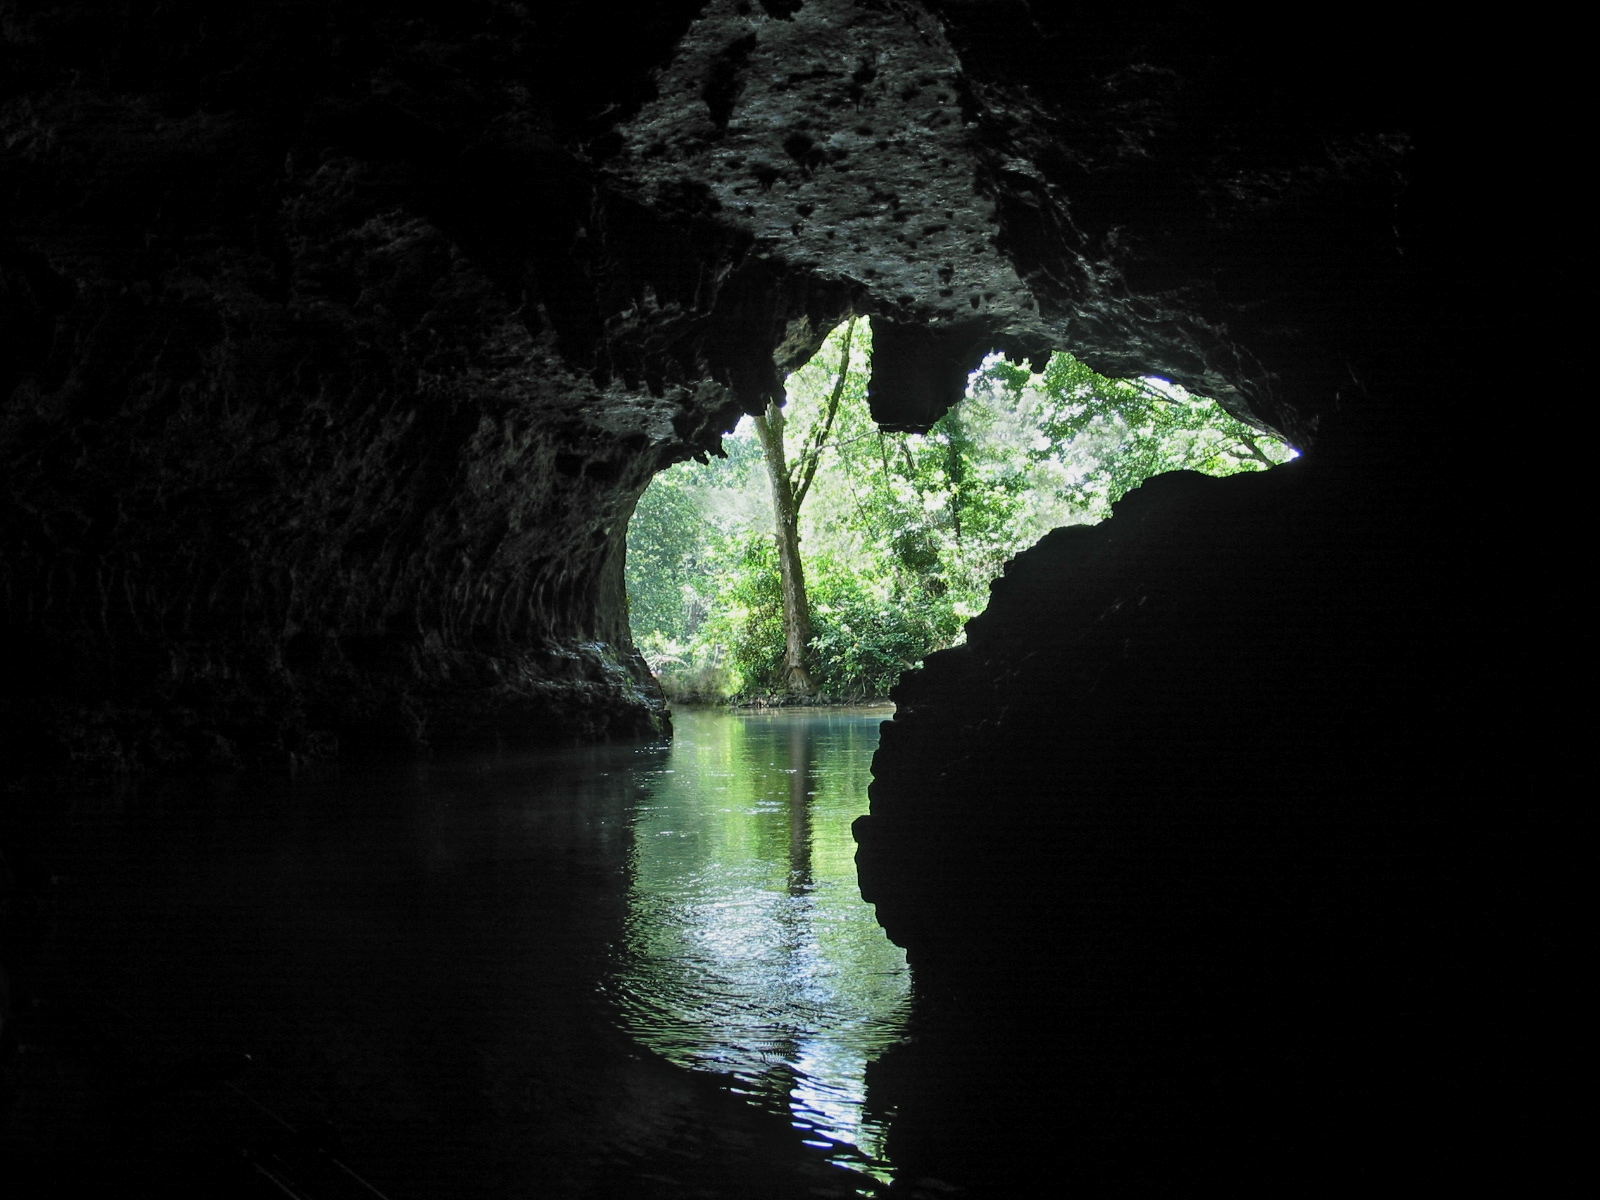 inside caves with water